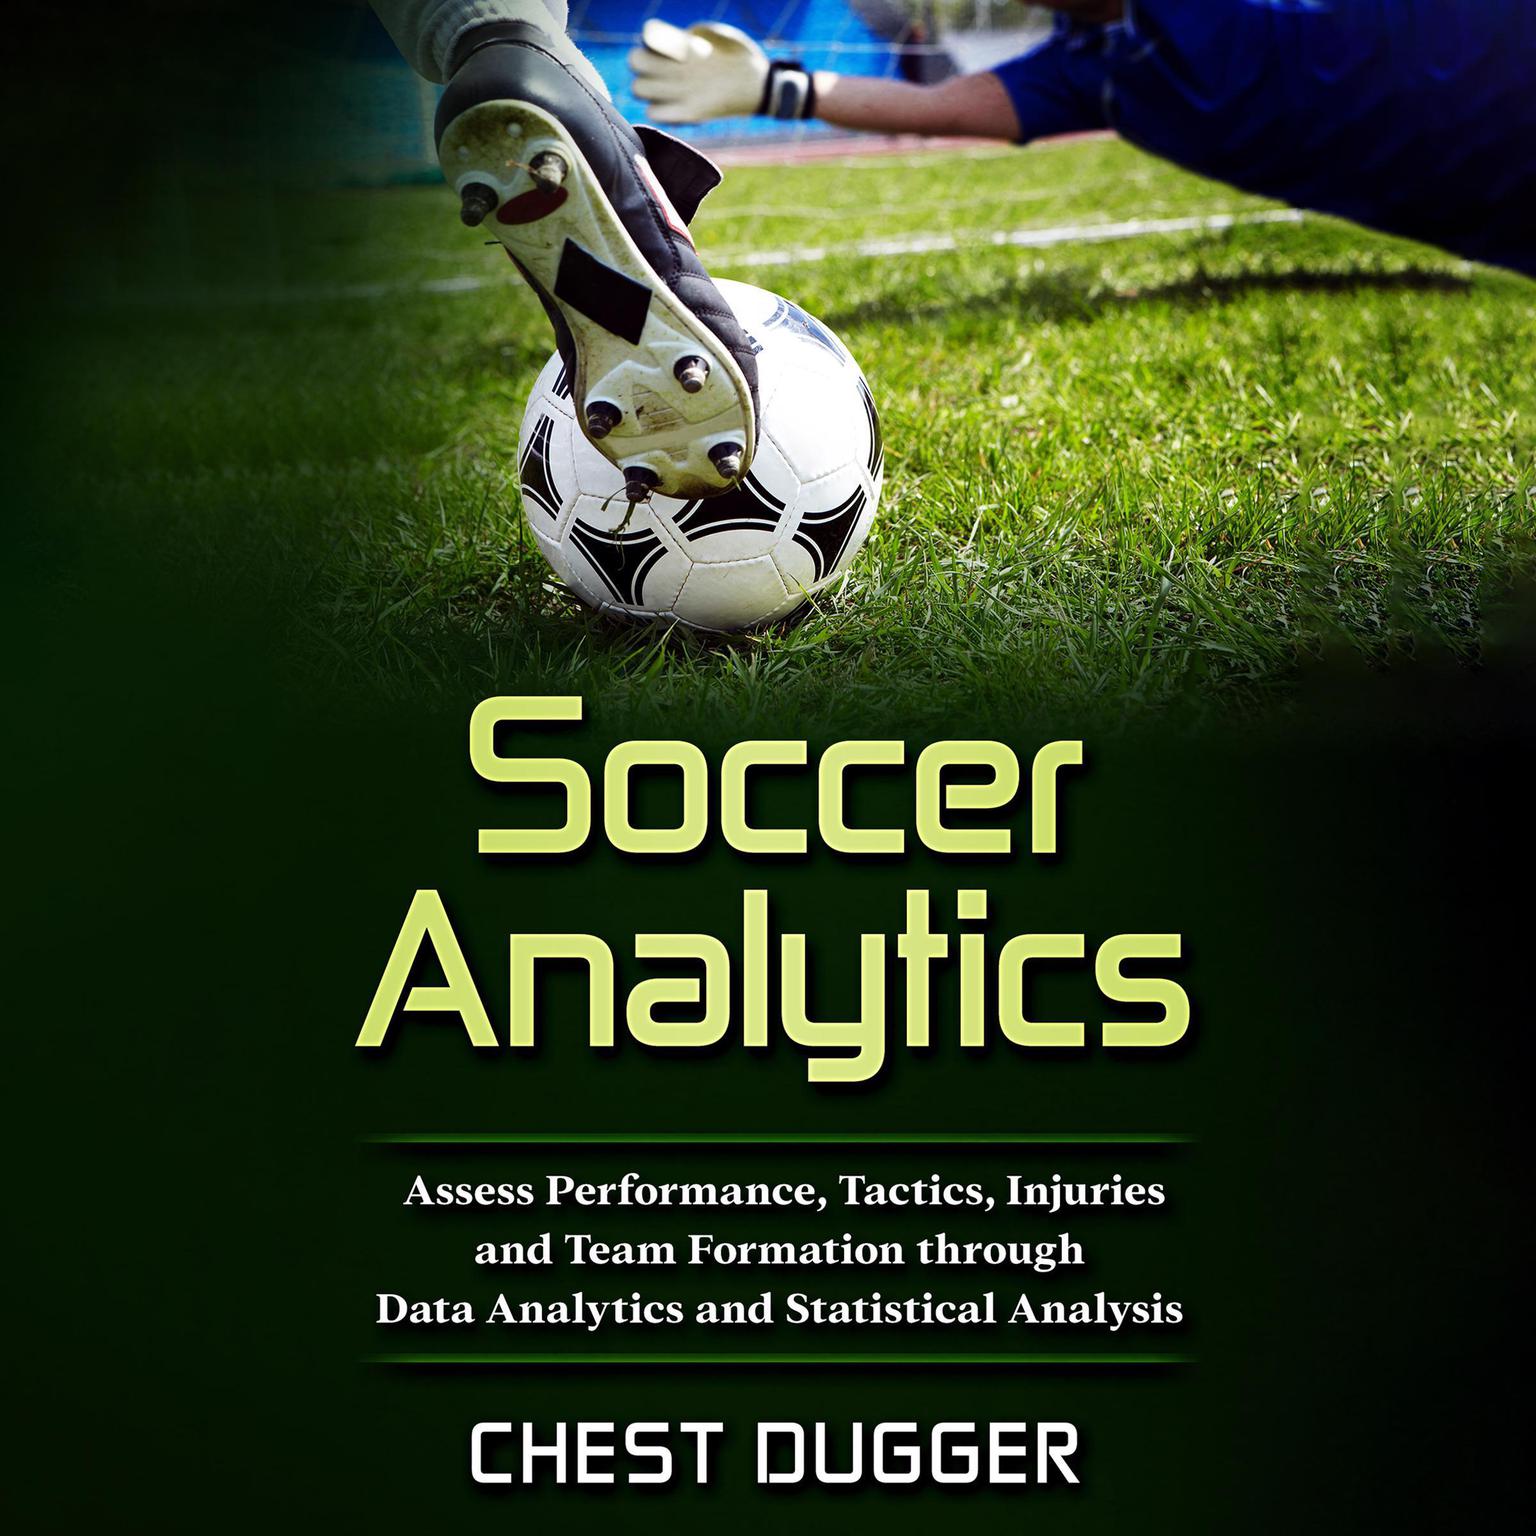 Soccer Analytics: Assess Performance, Tactics, Injuries and Team Formation through Data Analytics and Statistical Analysis Audiobook, by Chest Dugger